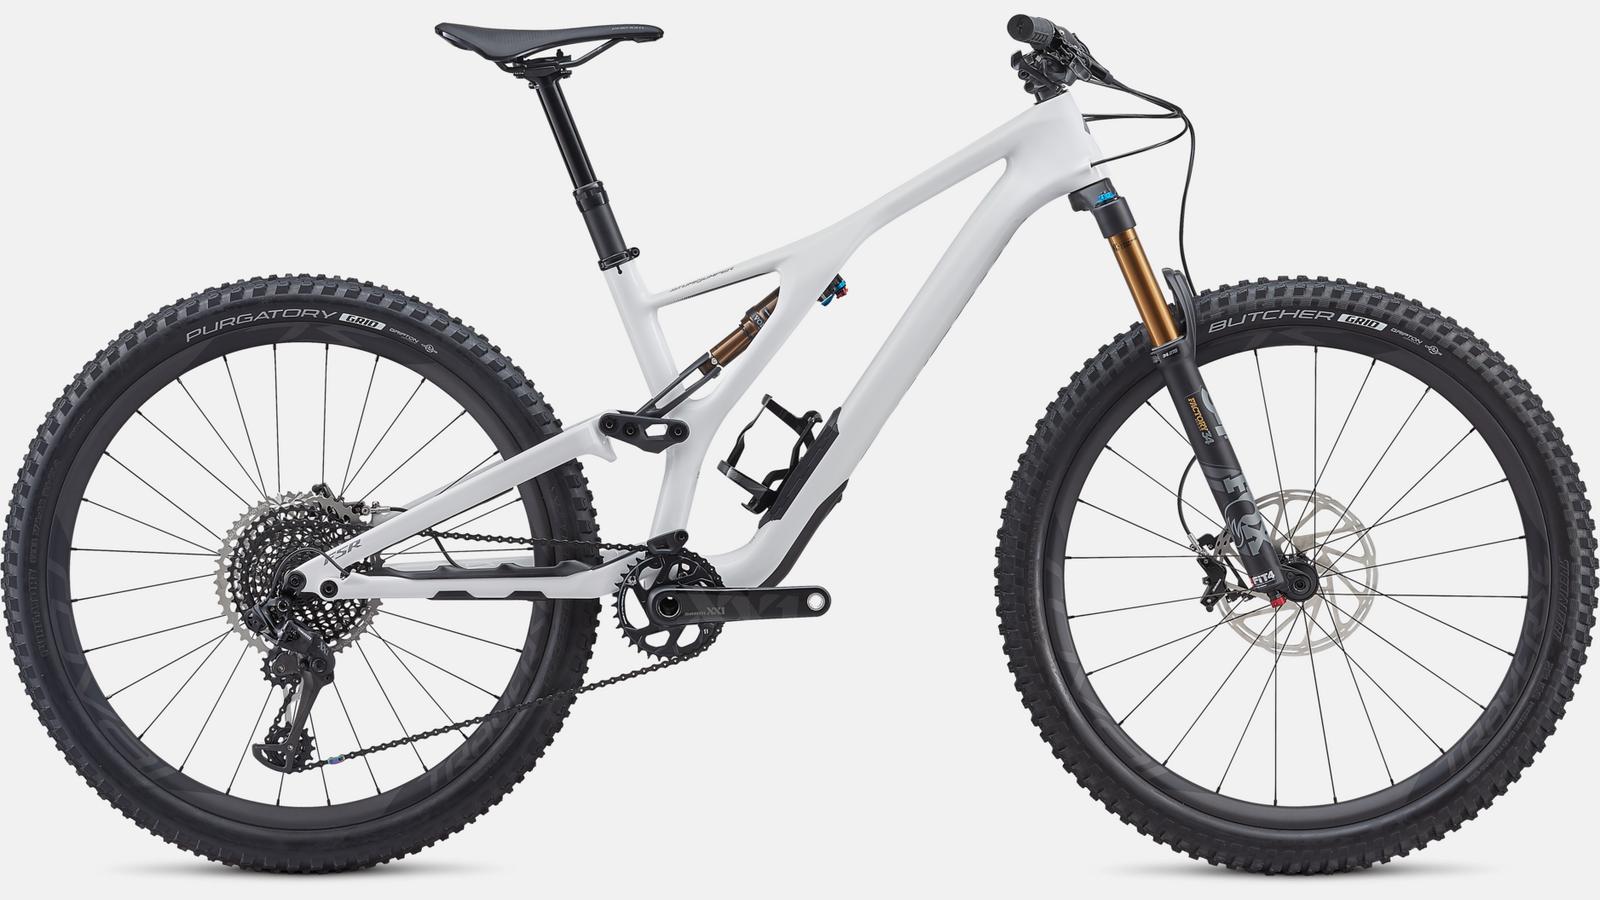 Paint for 2019 Specialized S-Works Stumpjumper ST 27.5 - Gloss White